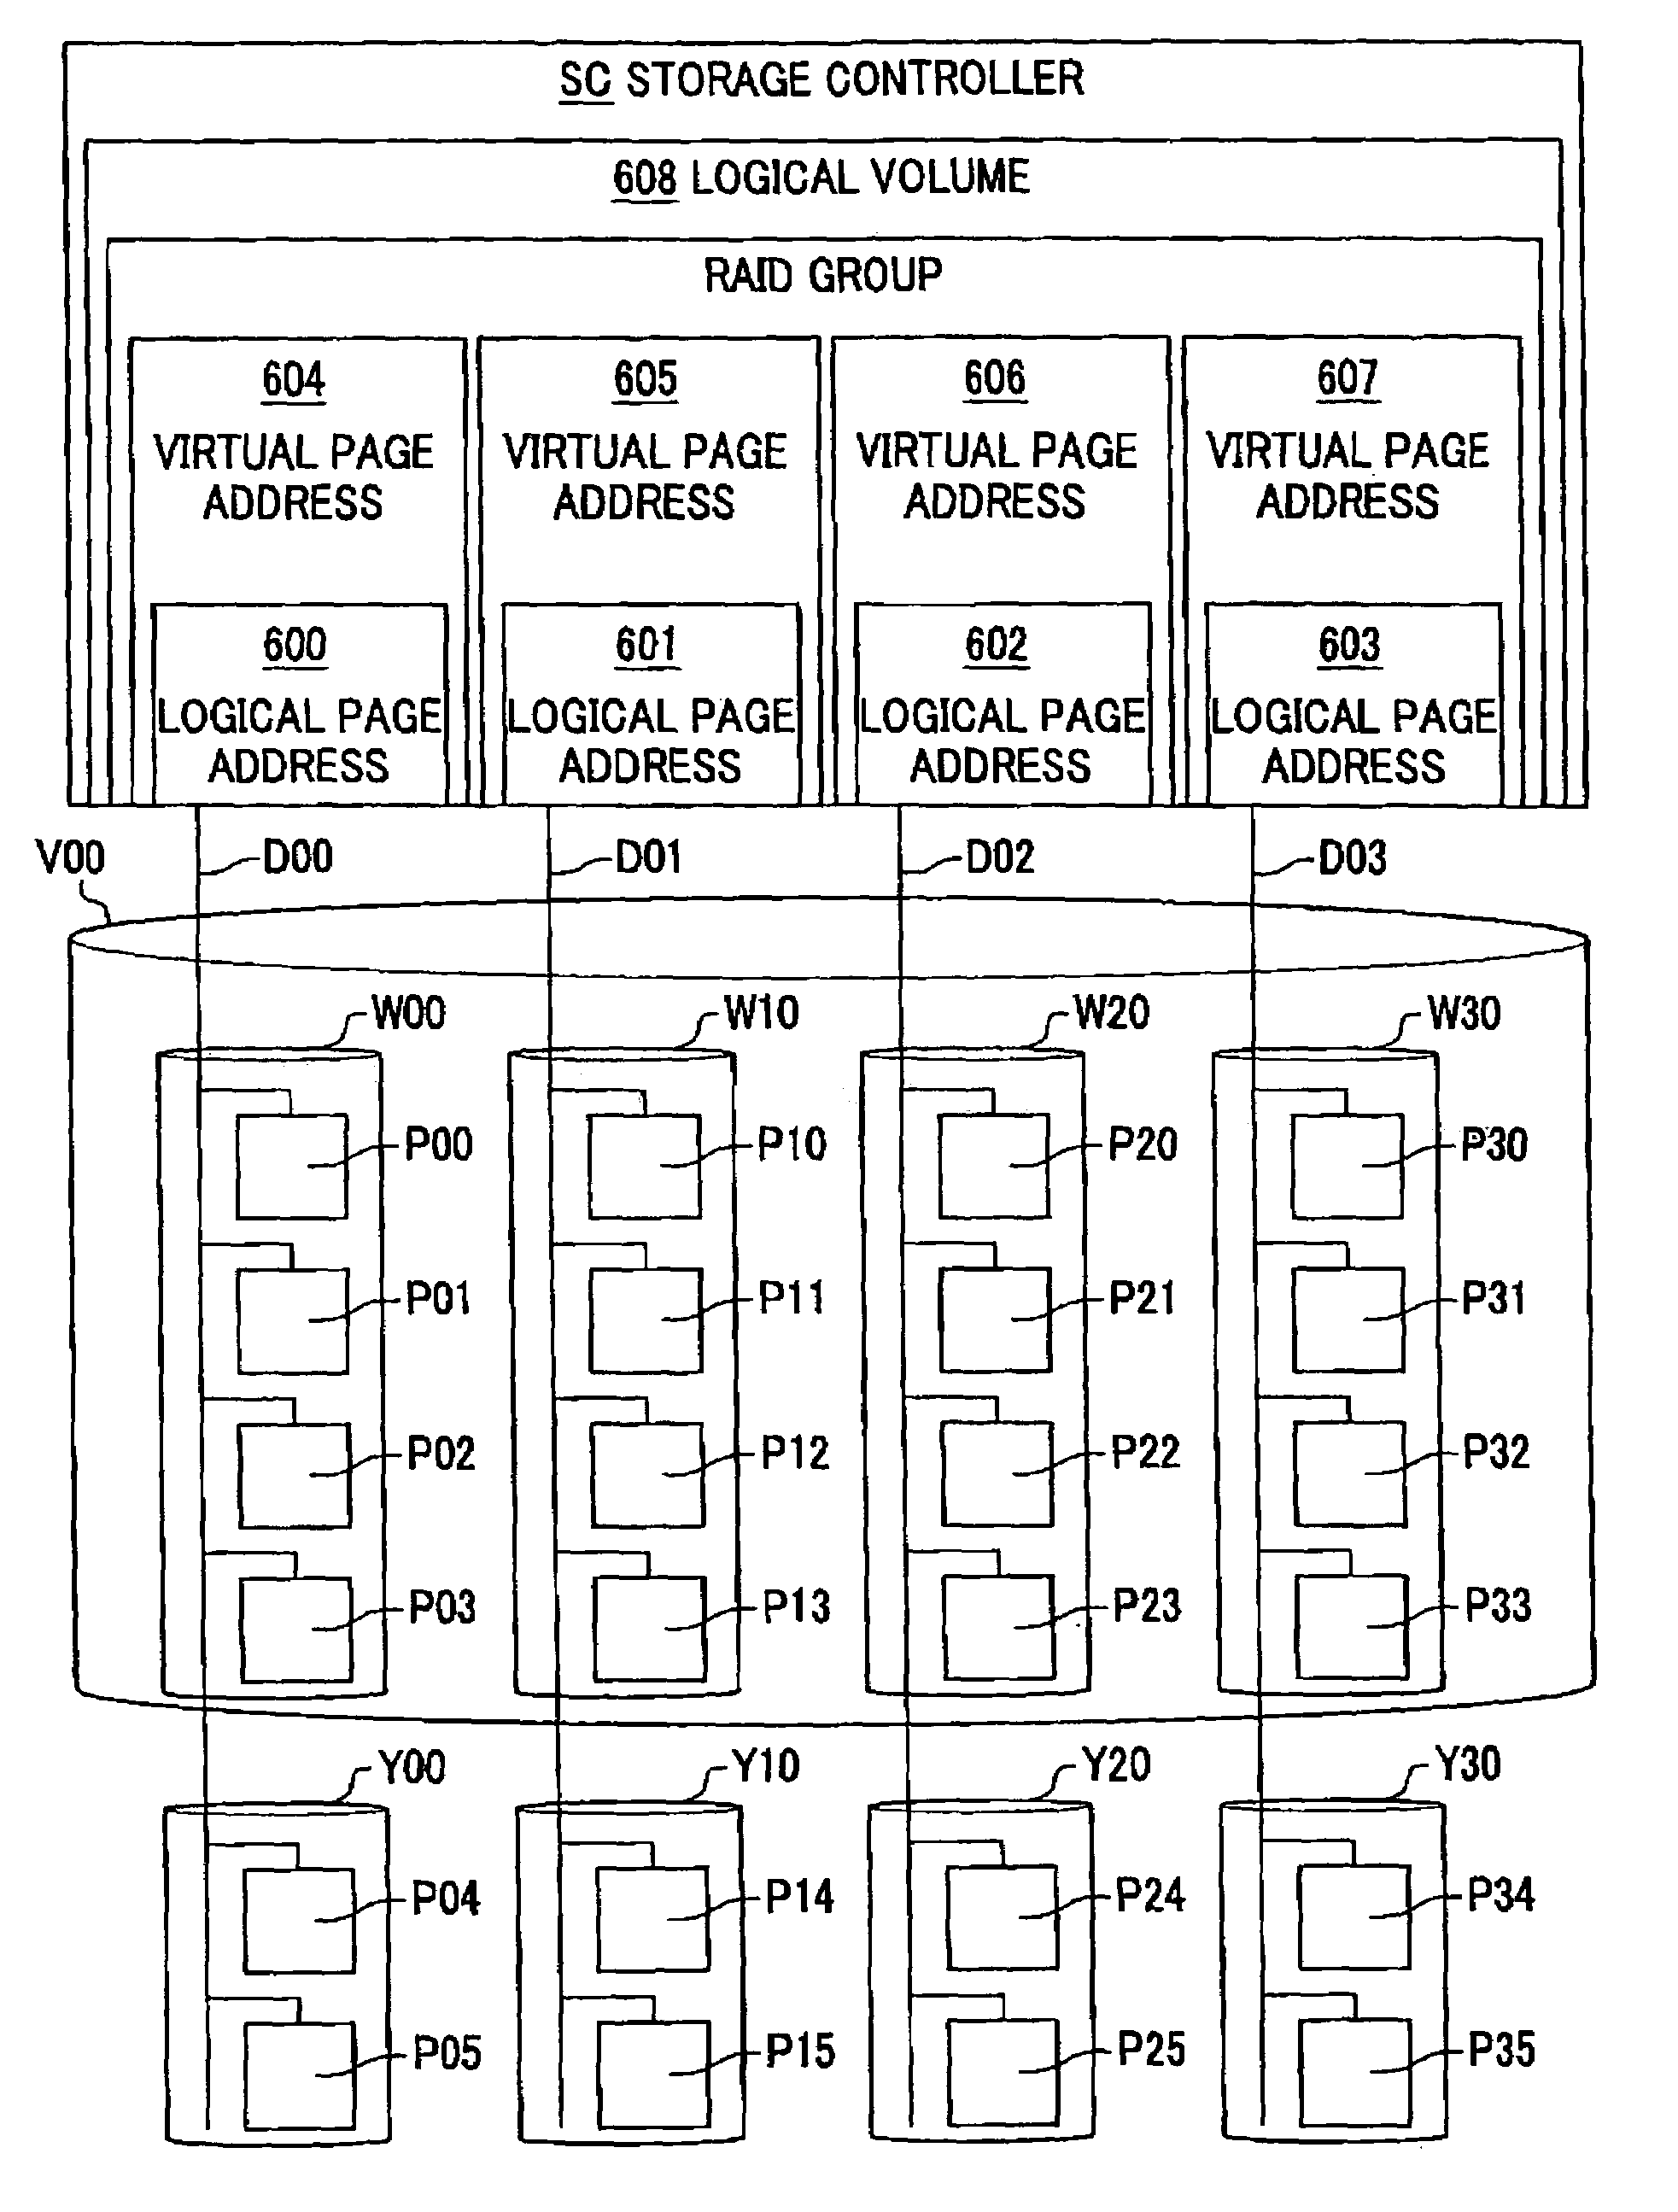 Storage system using flash memory modules logically grouped for wear-leveling and RAID